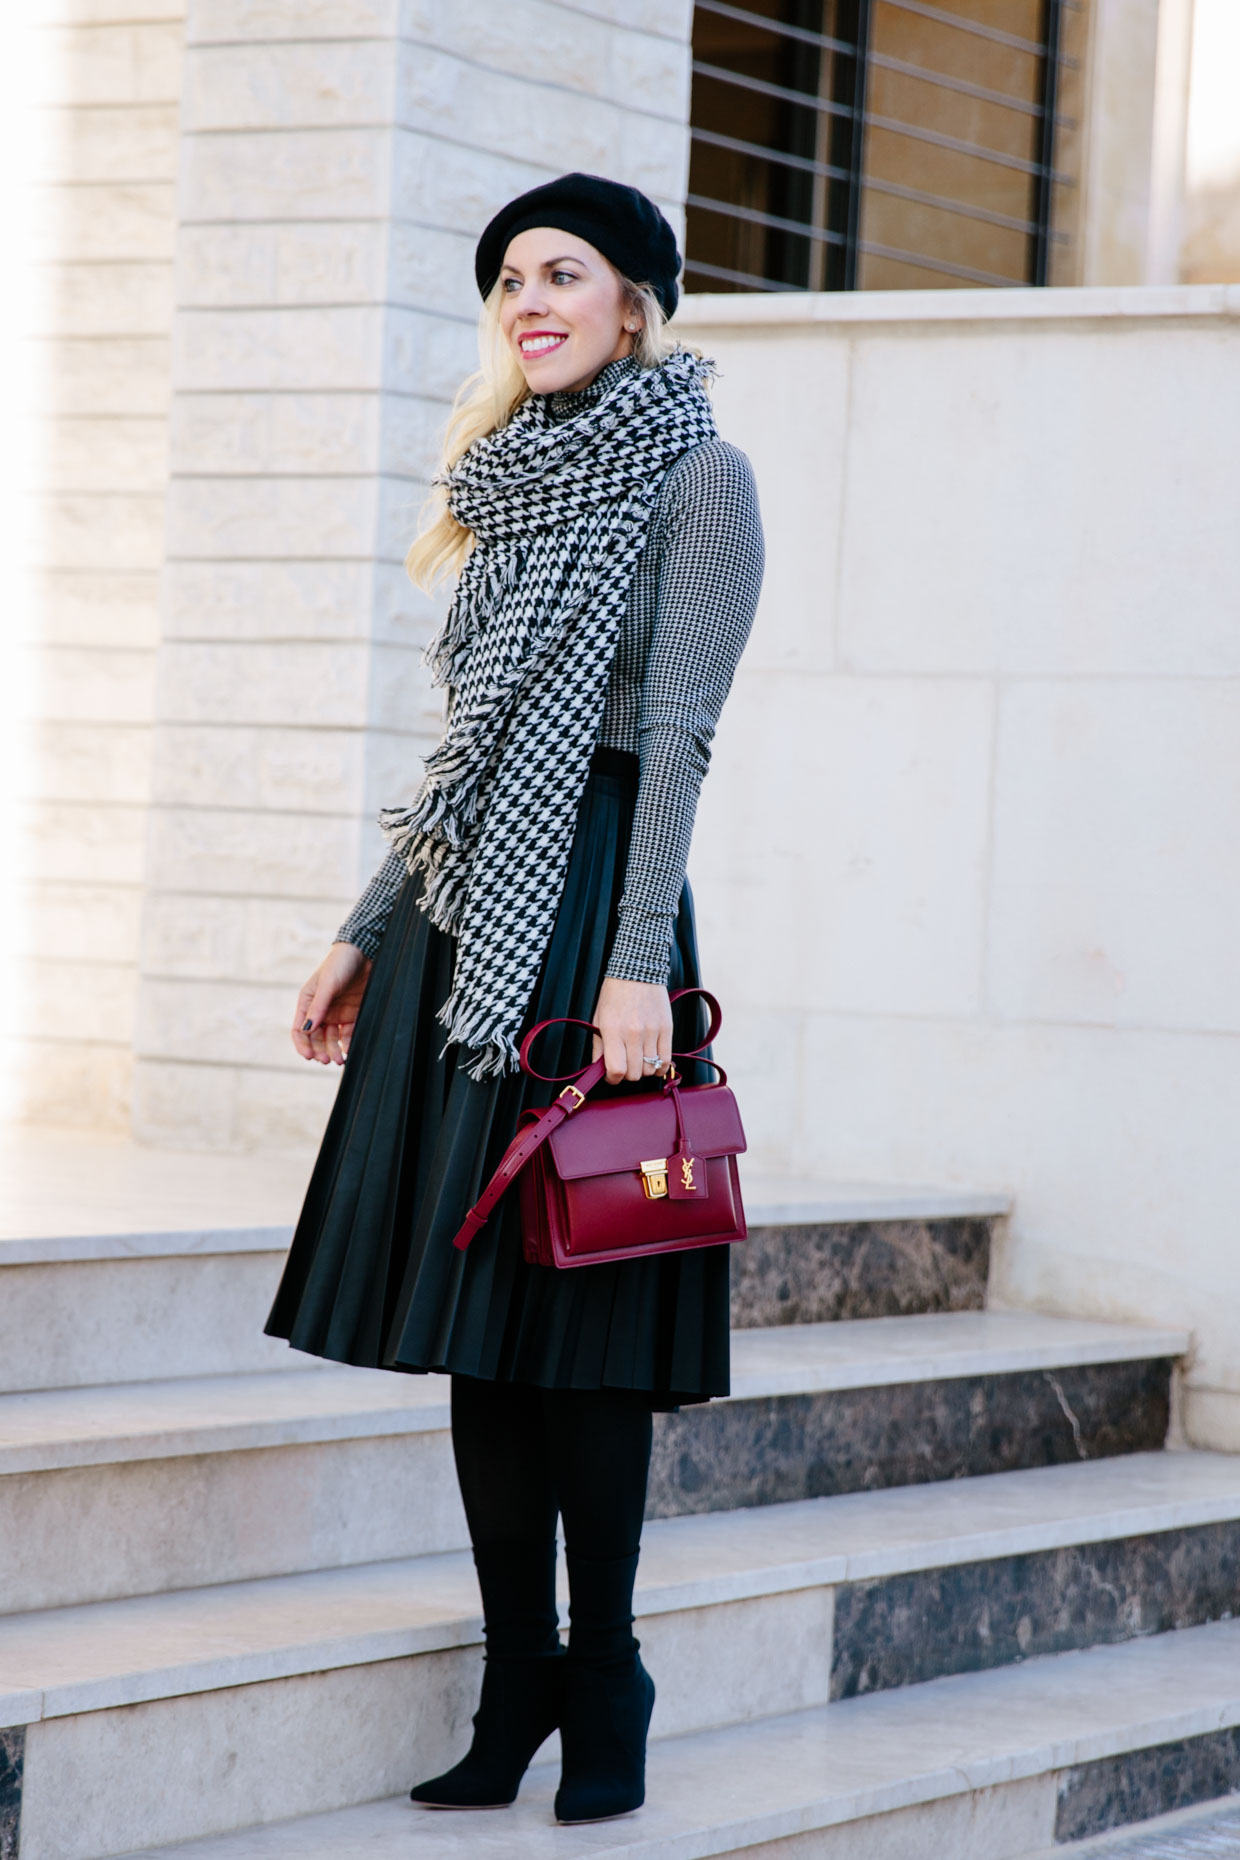 midi skirt with tights and boots